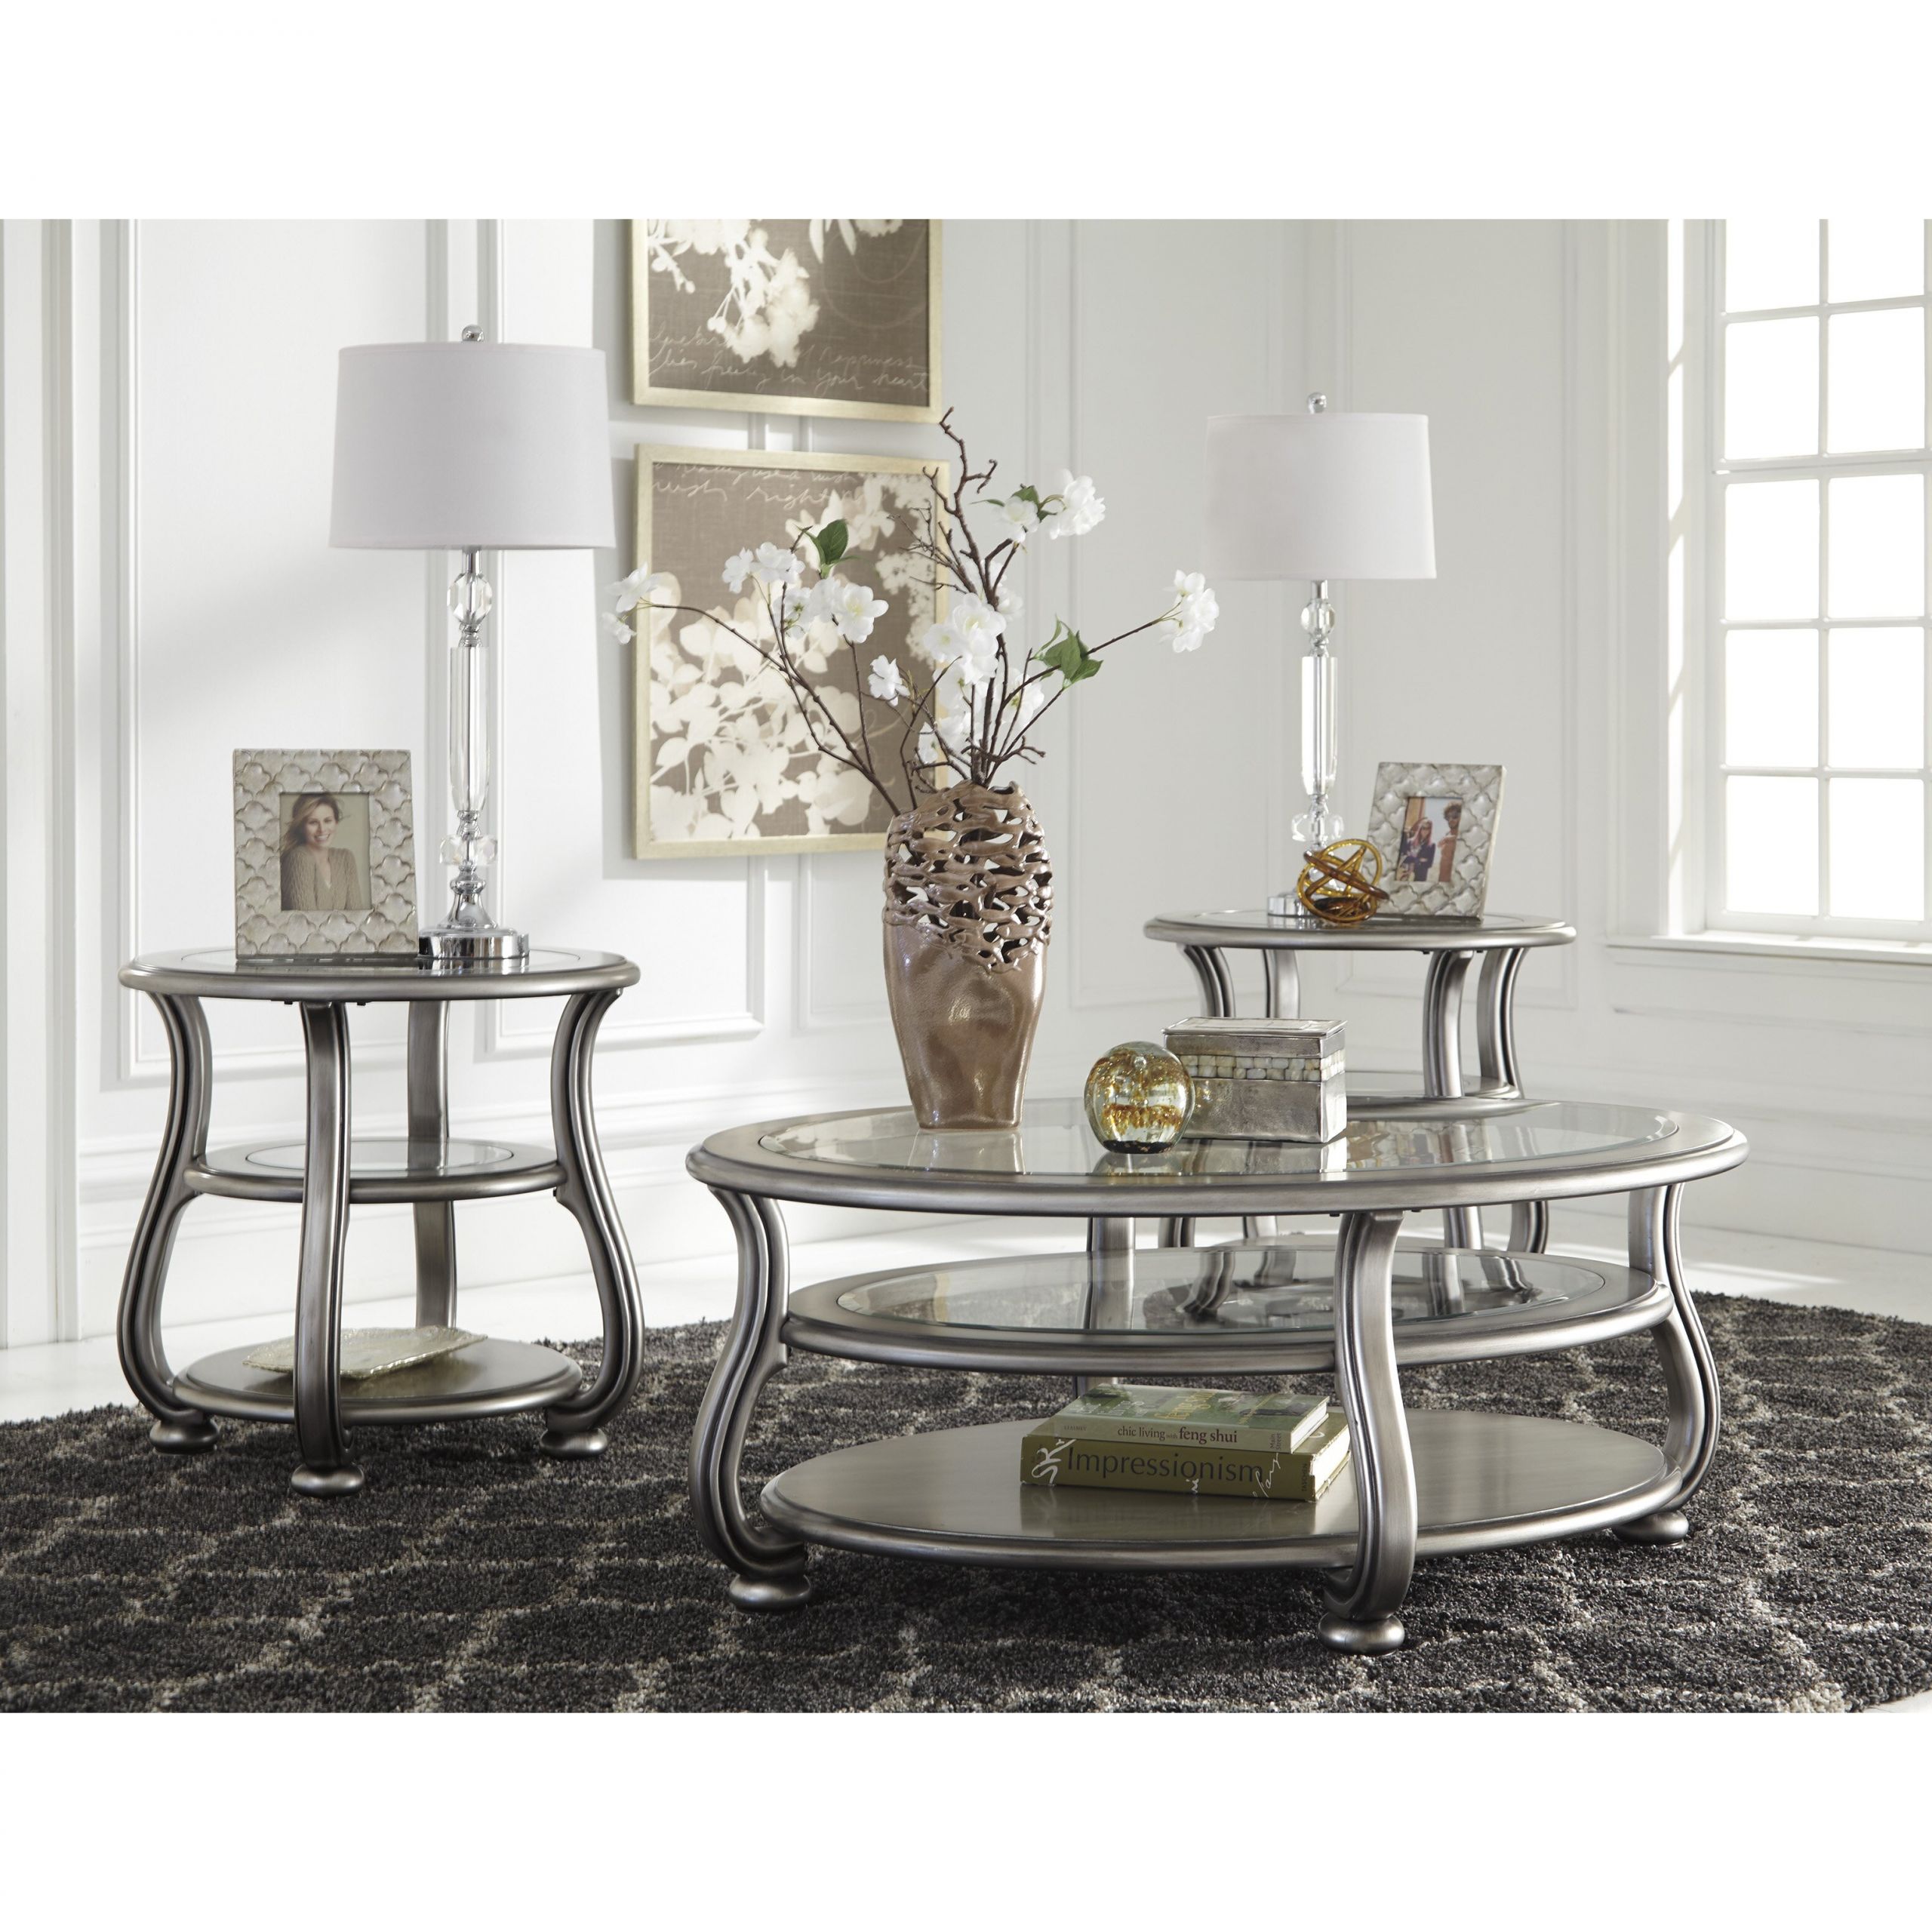 Living Room Coffee Table Sets
 Signature Design by Ashley Coralayne Coffee Table Set